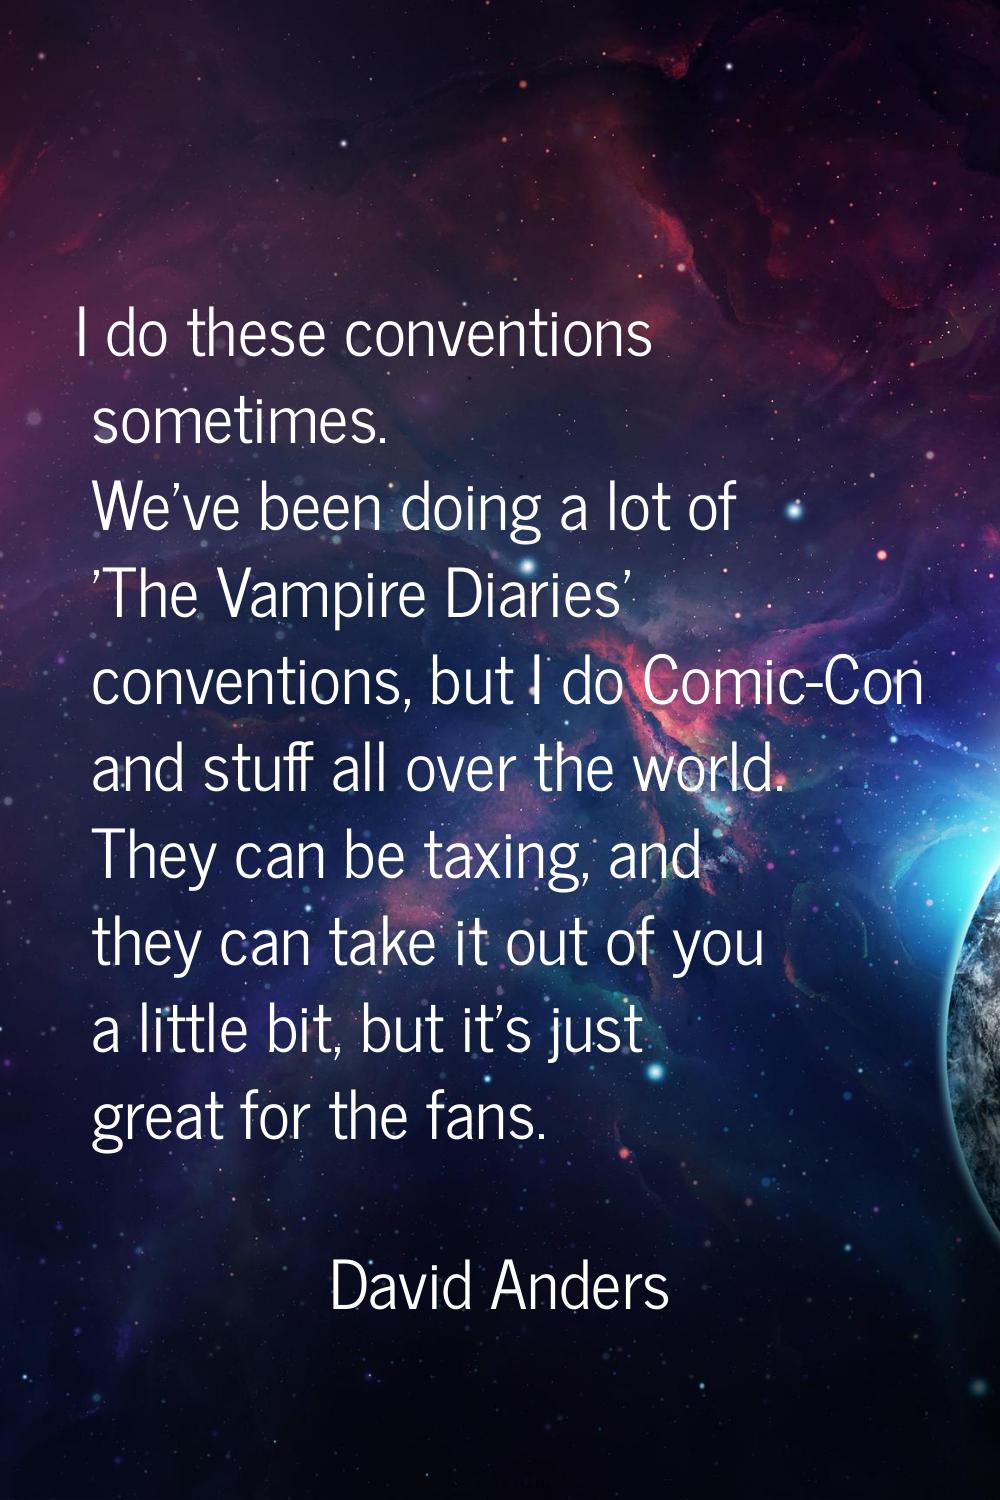 I do these conventions sometimes. We've been doing a lot of 'The Vampire Diaries' conventions, but 